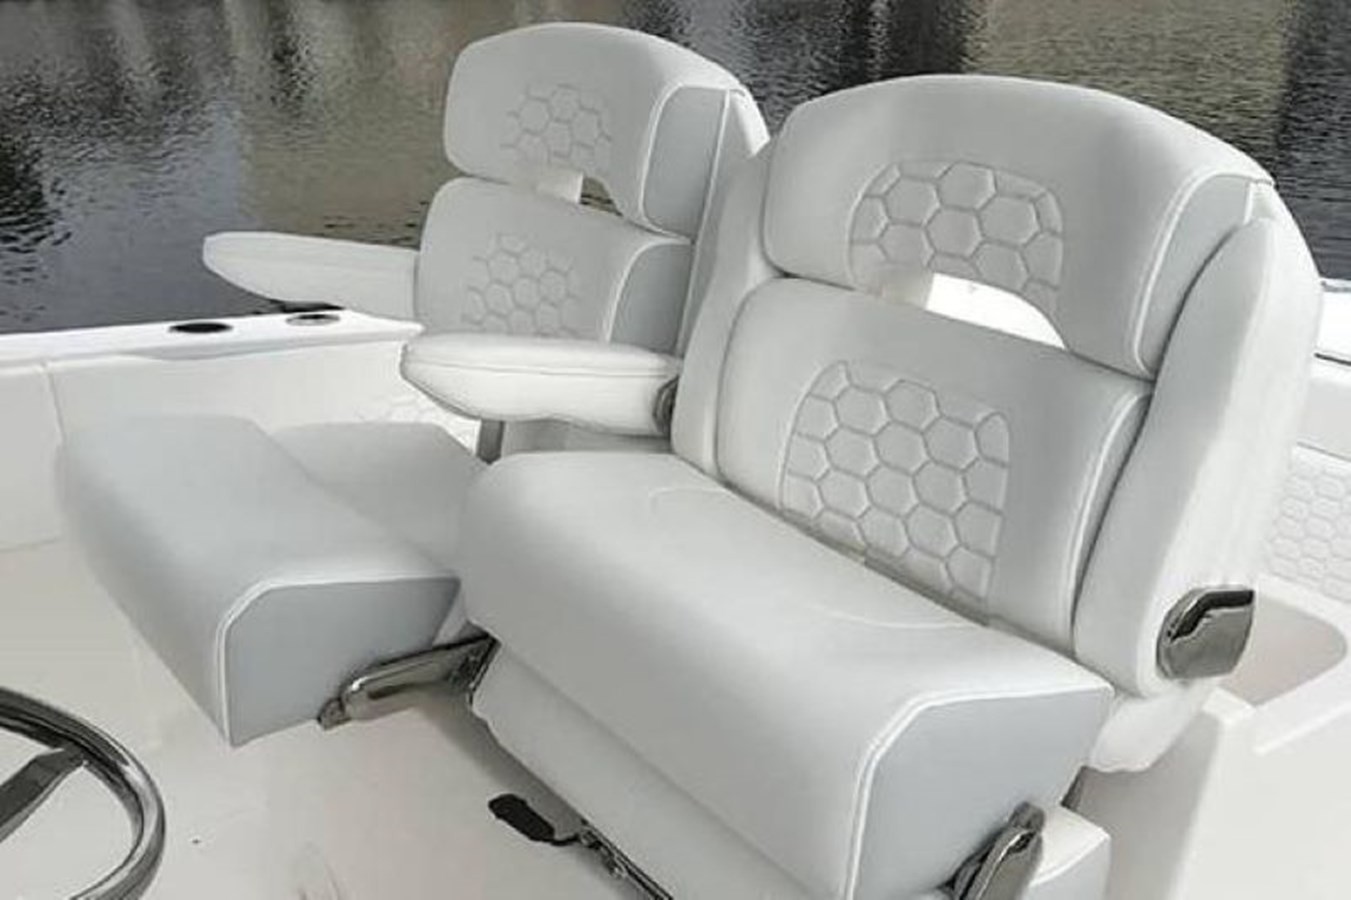 New Power Center Console for Sale 2022 31T Layout & Accommodations